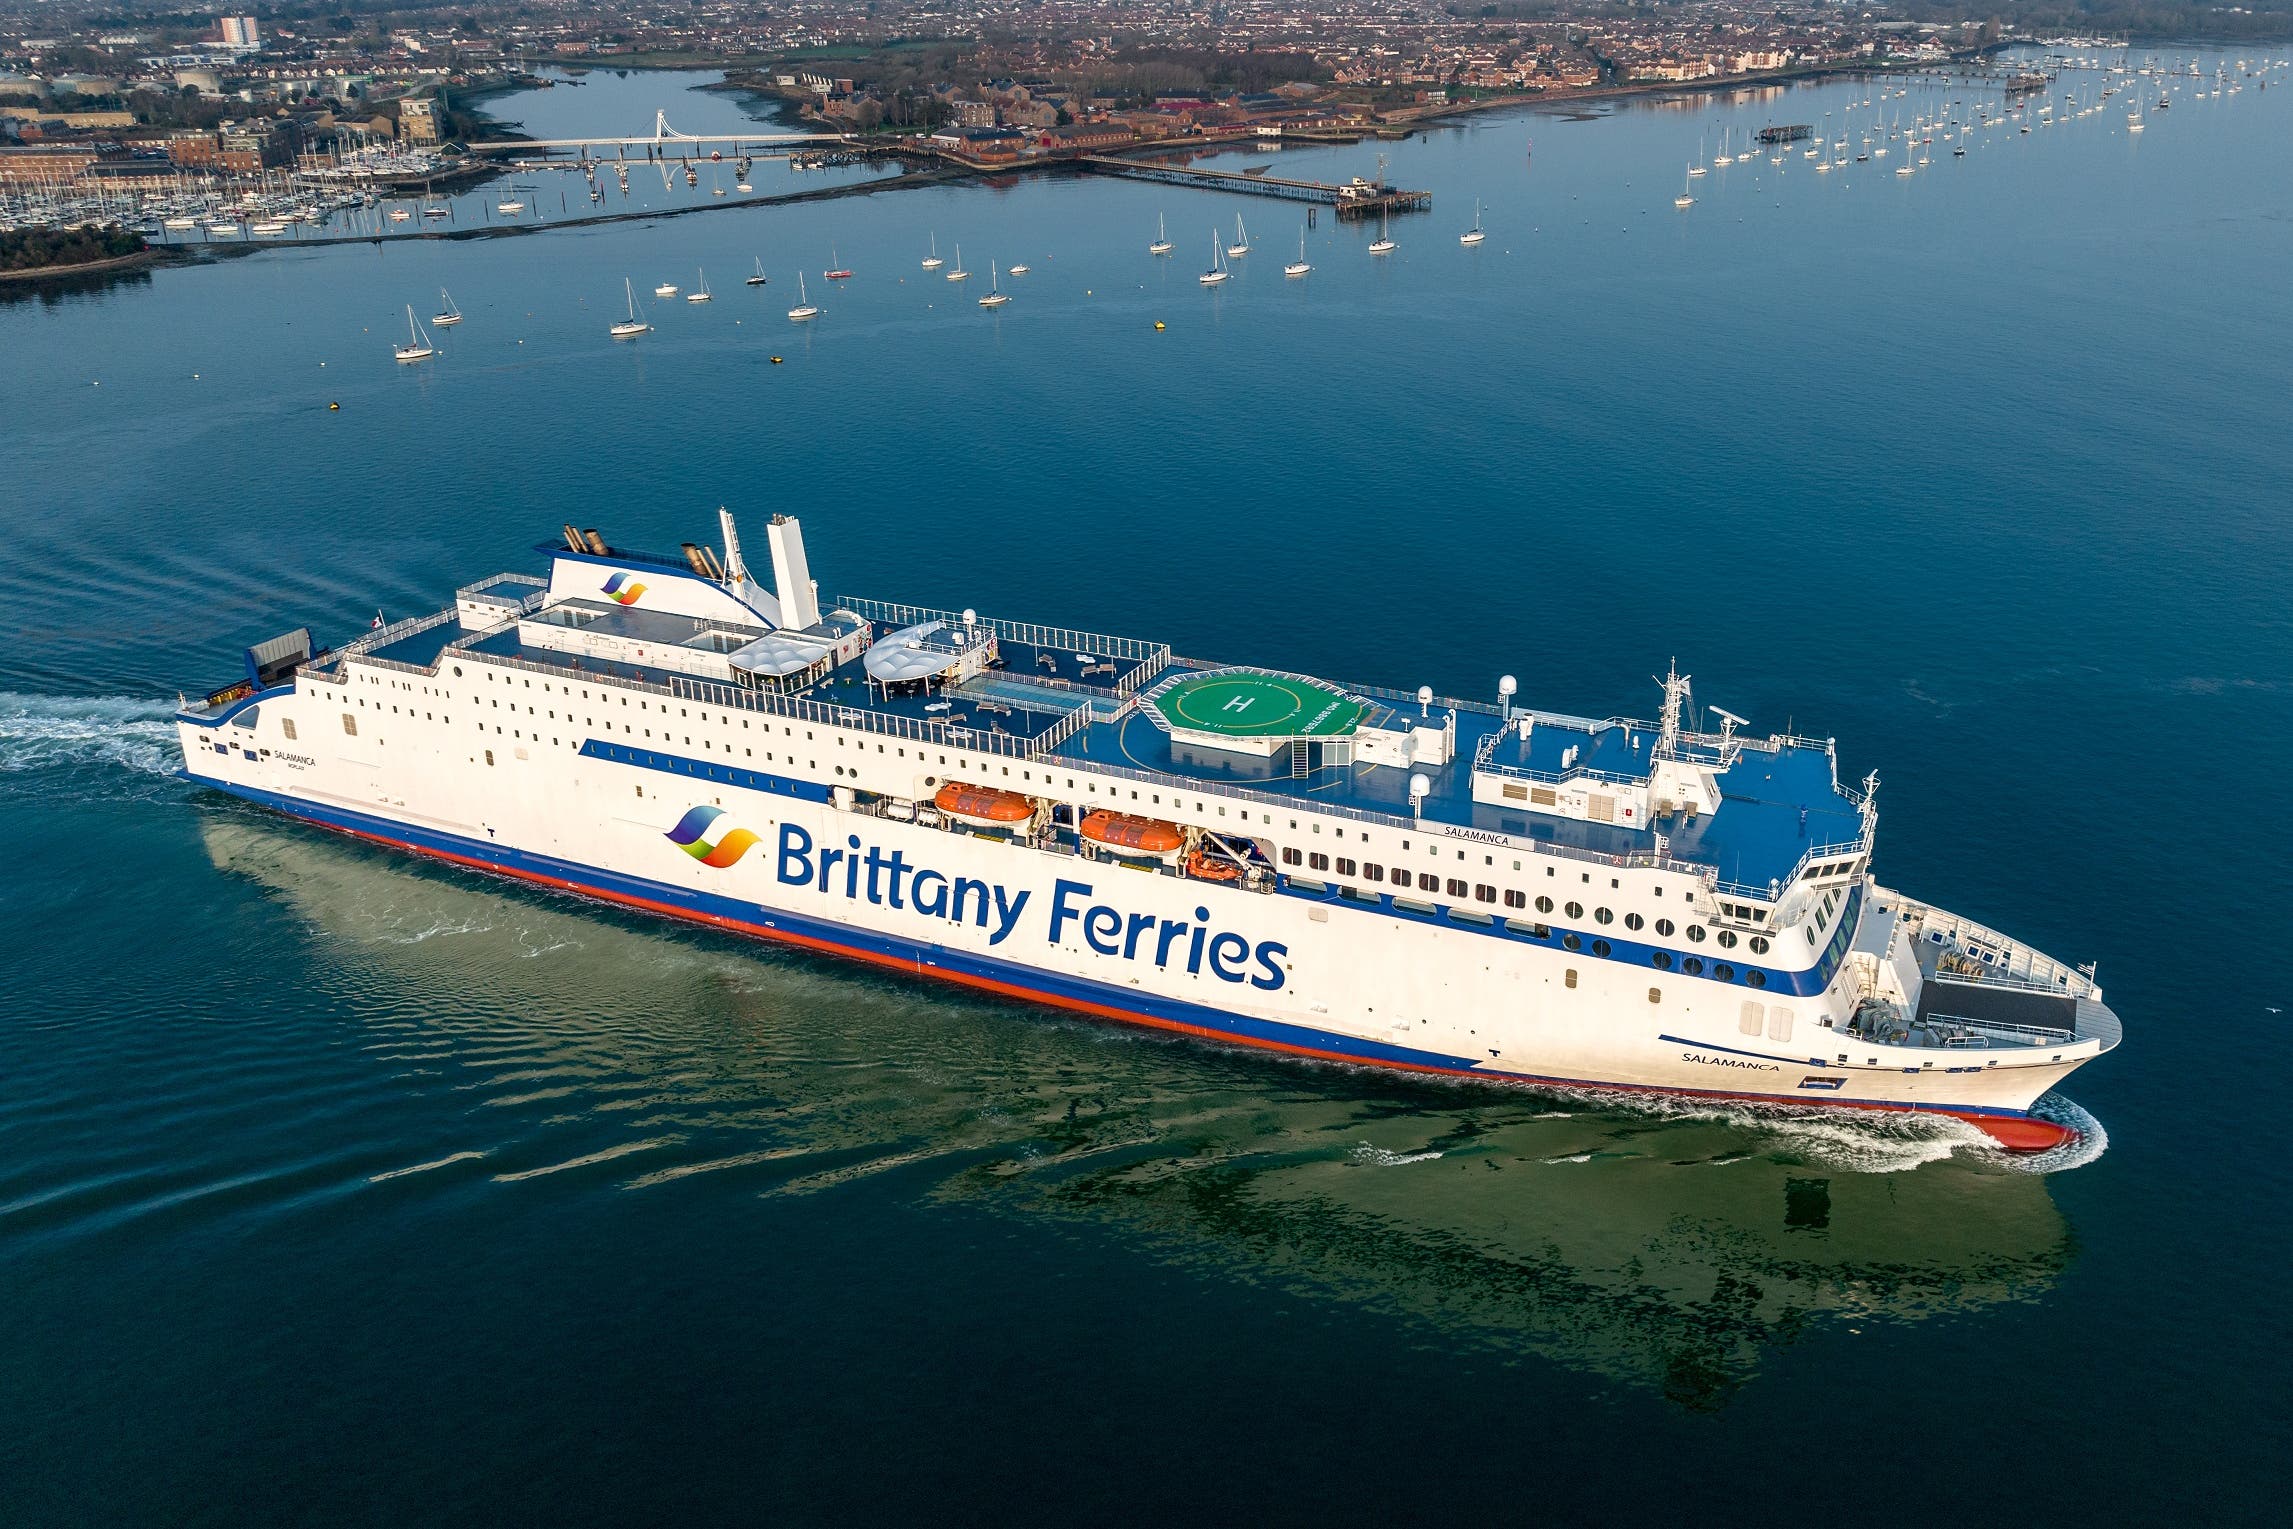 Cash call: Brittany Ferries will accept euros only from next month